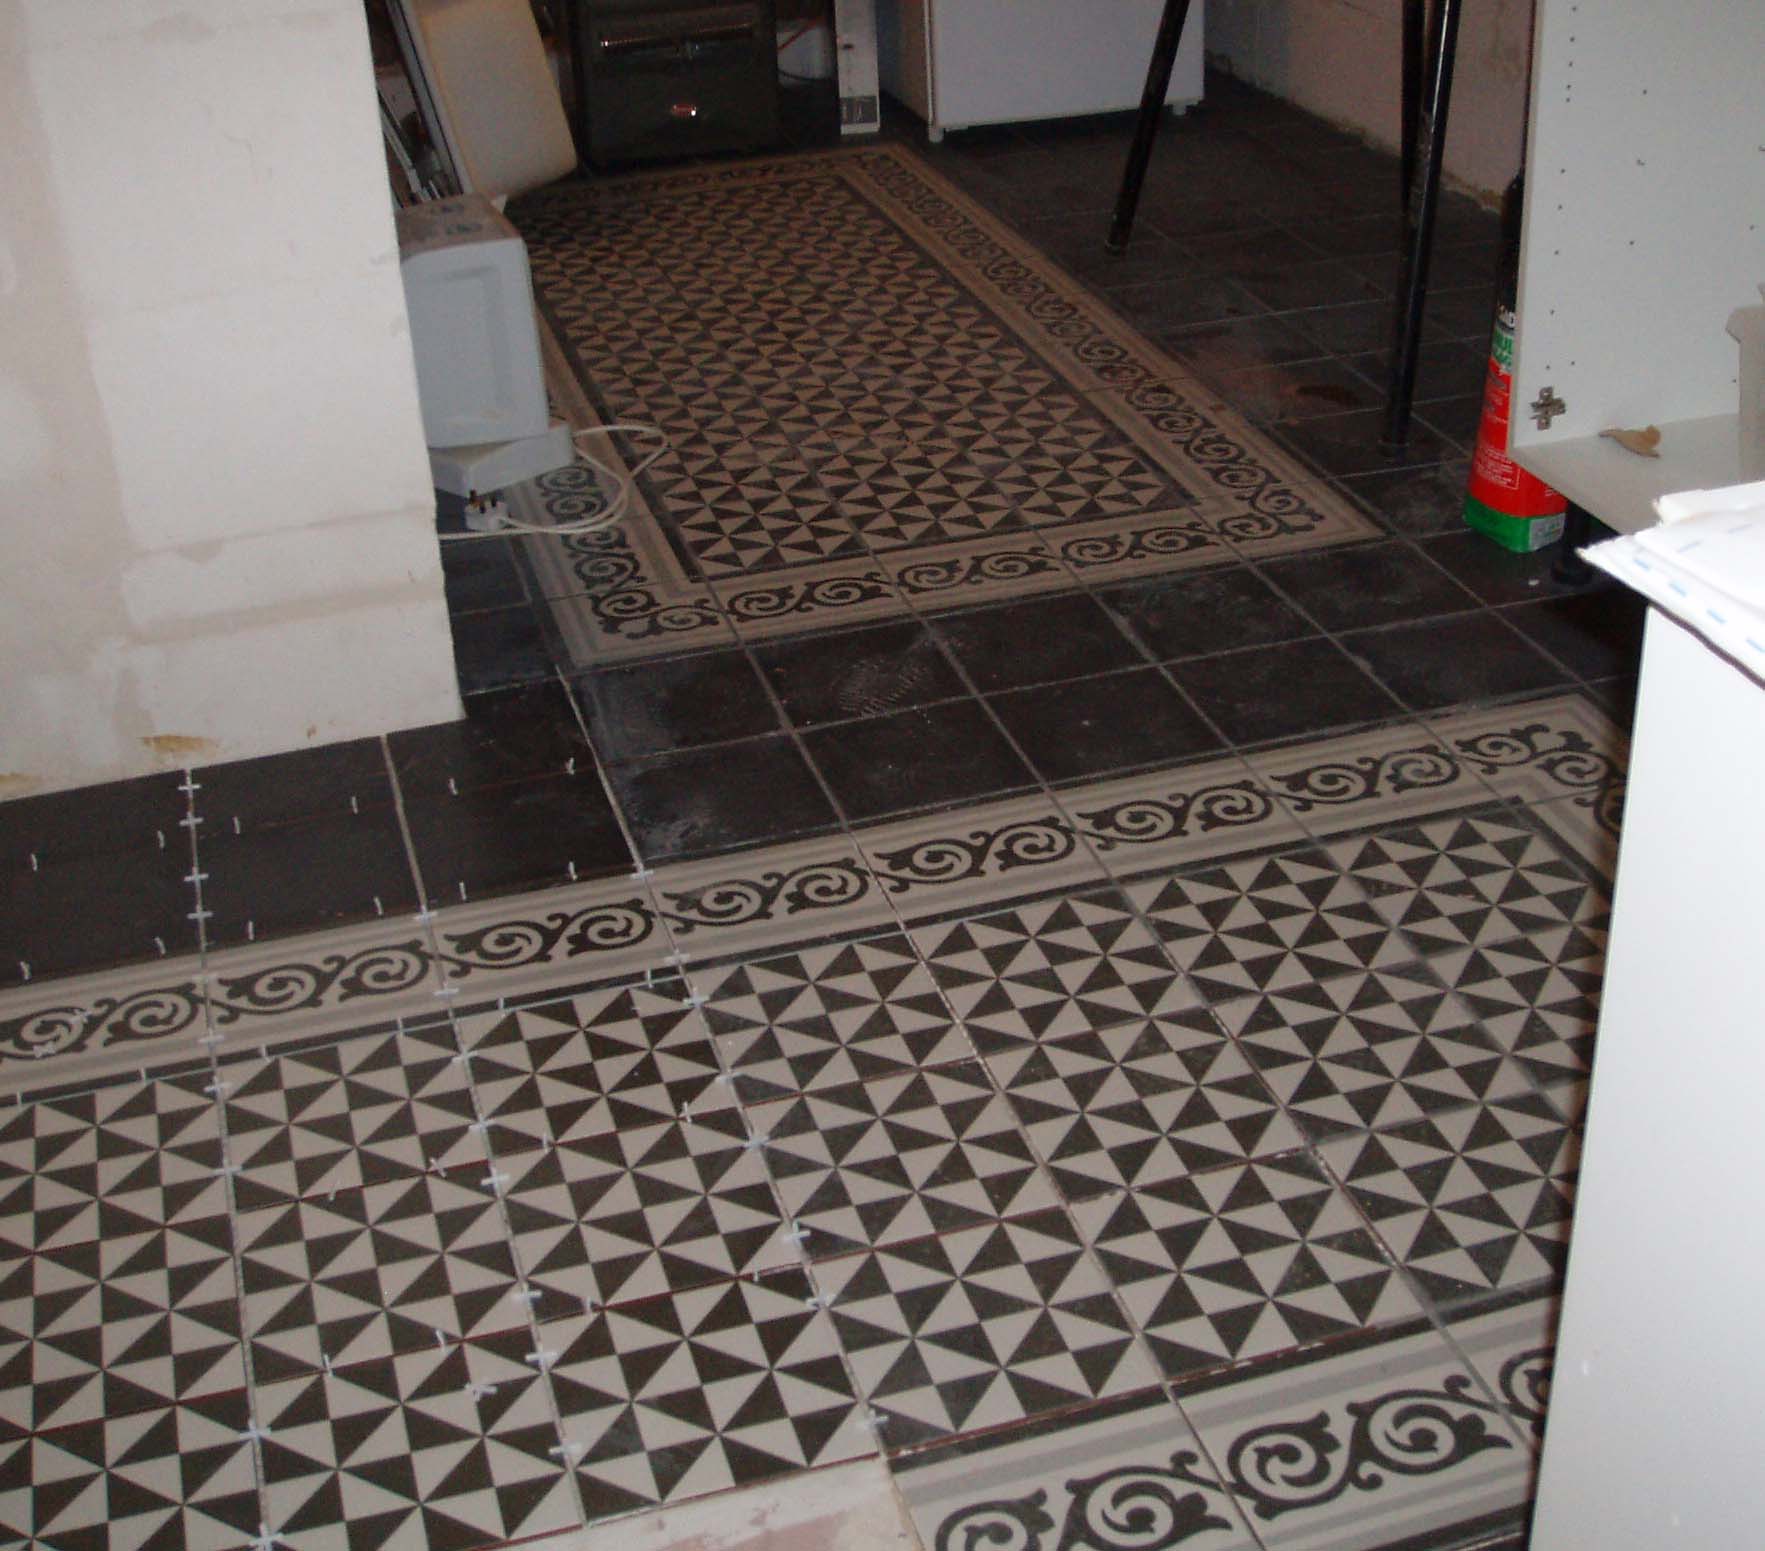 Image of more floor tiles laid